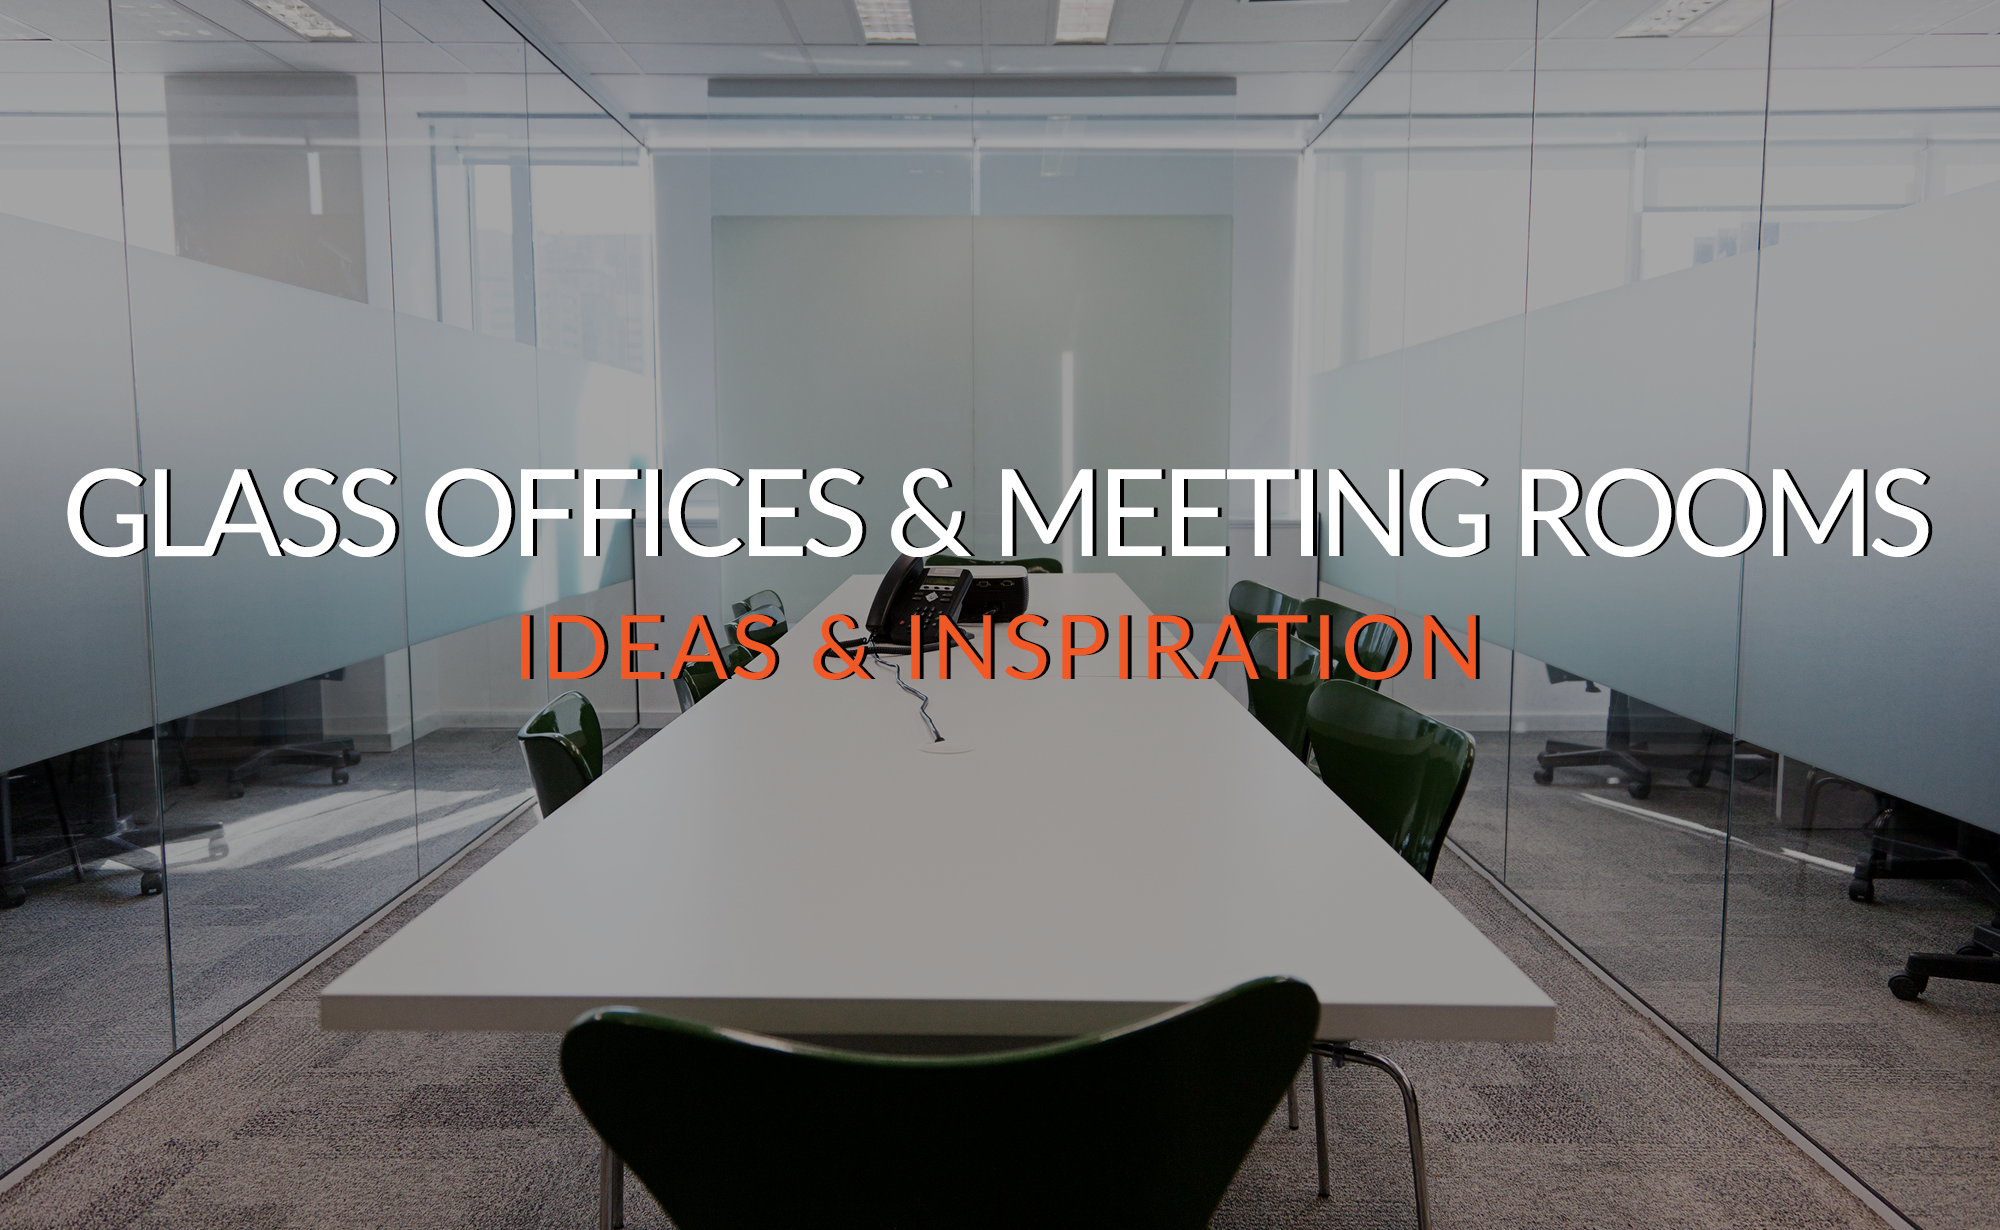 Glass Office and Meeting Rooms - Ideas & Inspiration